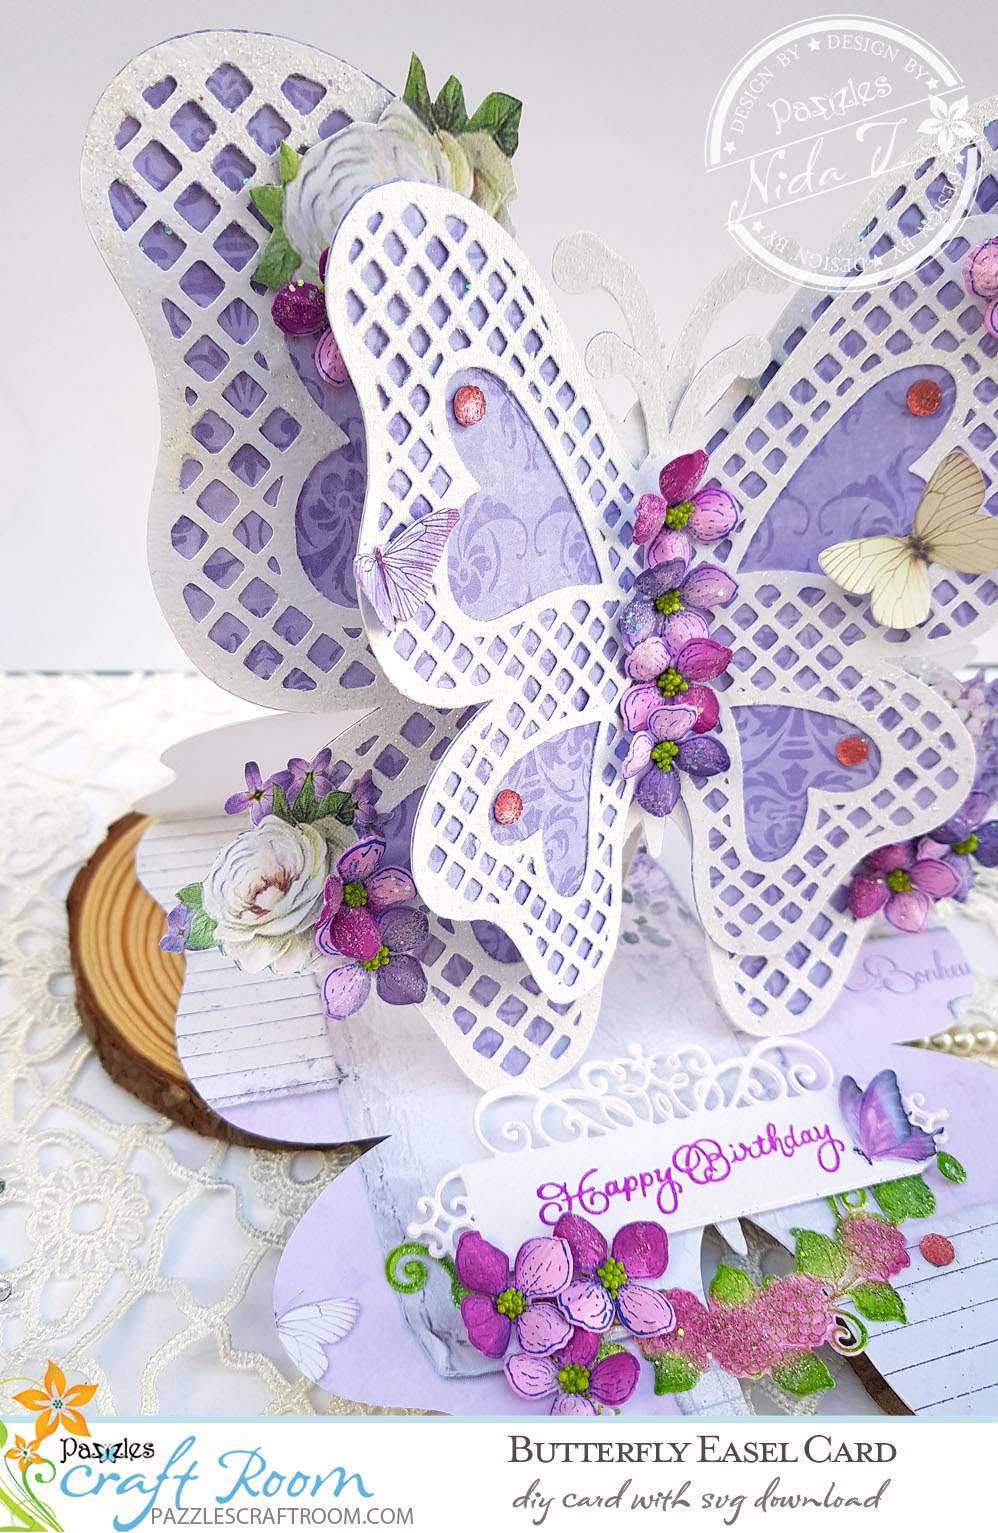 Pazzles DIY Butterfly Easel Card with instant SVG download. Compatible with all major electronic cutters including Pazzles Inspiration, Cricut, and Silhouette Cameo. Design by Nida Tanweer.